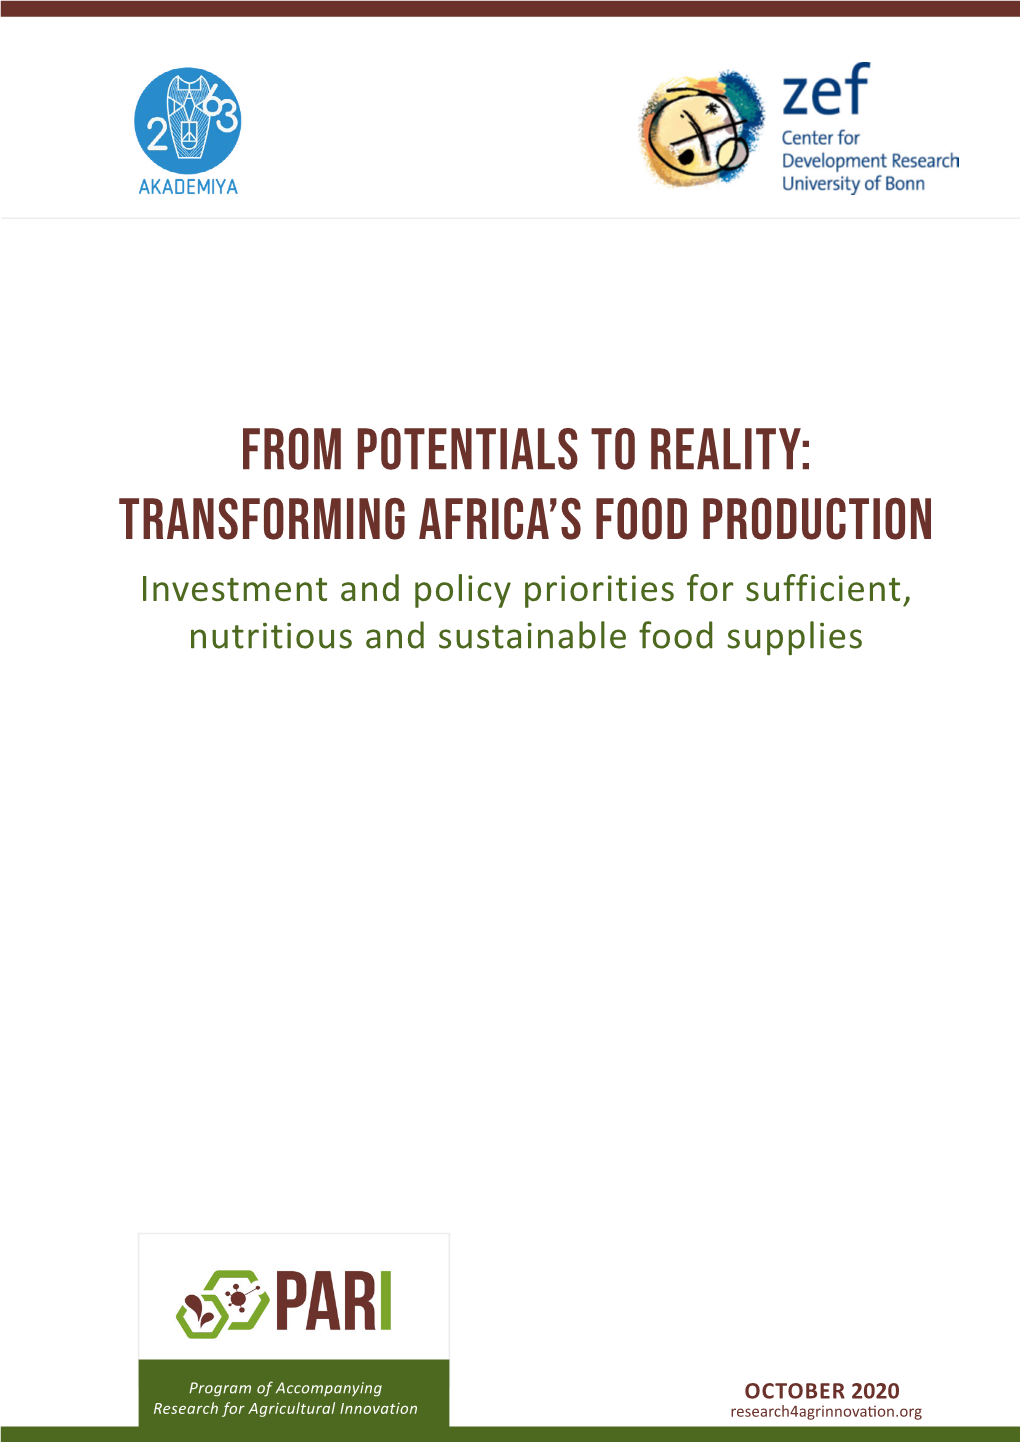 Transforming Africa's Food Production